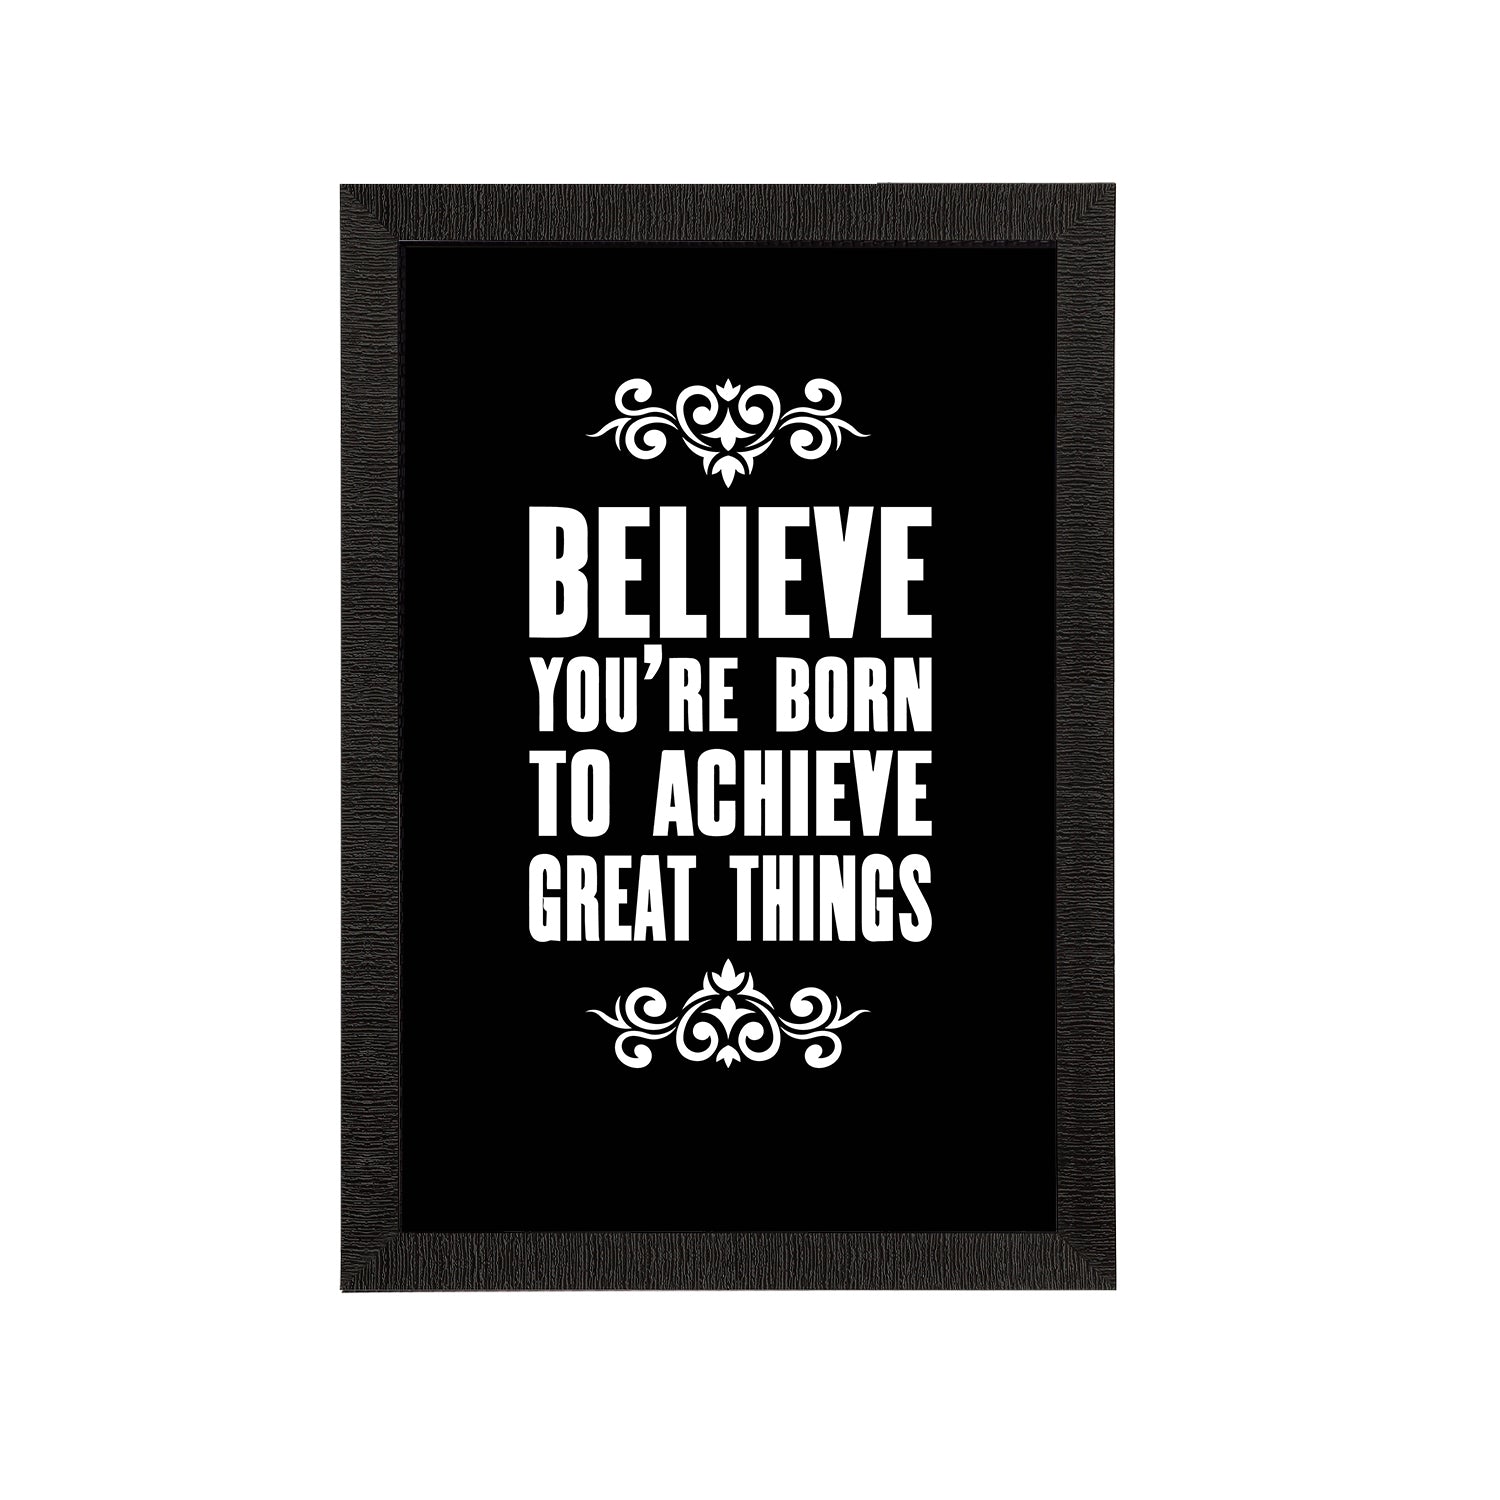 "Believe You're Born To Achieve Great Things" Motivational Quote Satin Matt Texture UV Art Painting